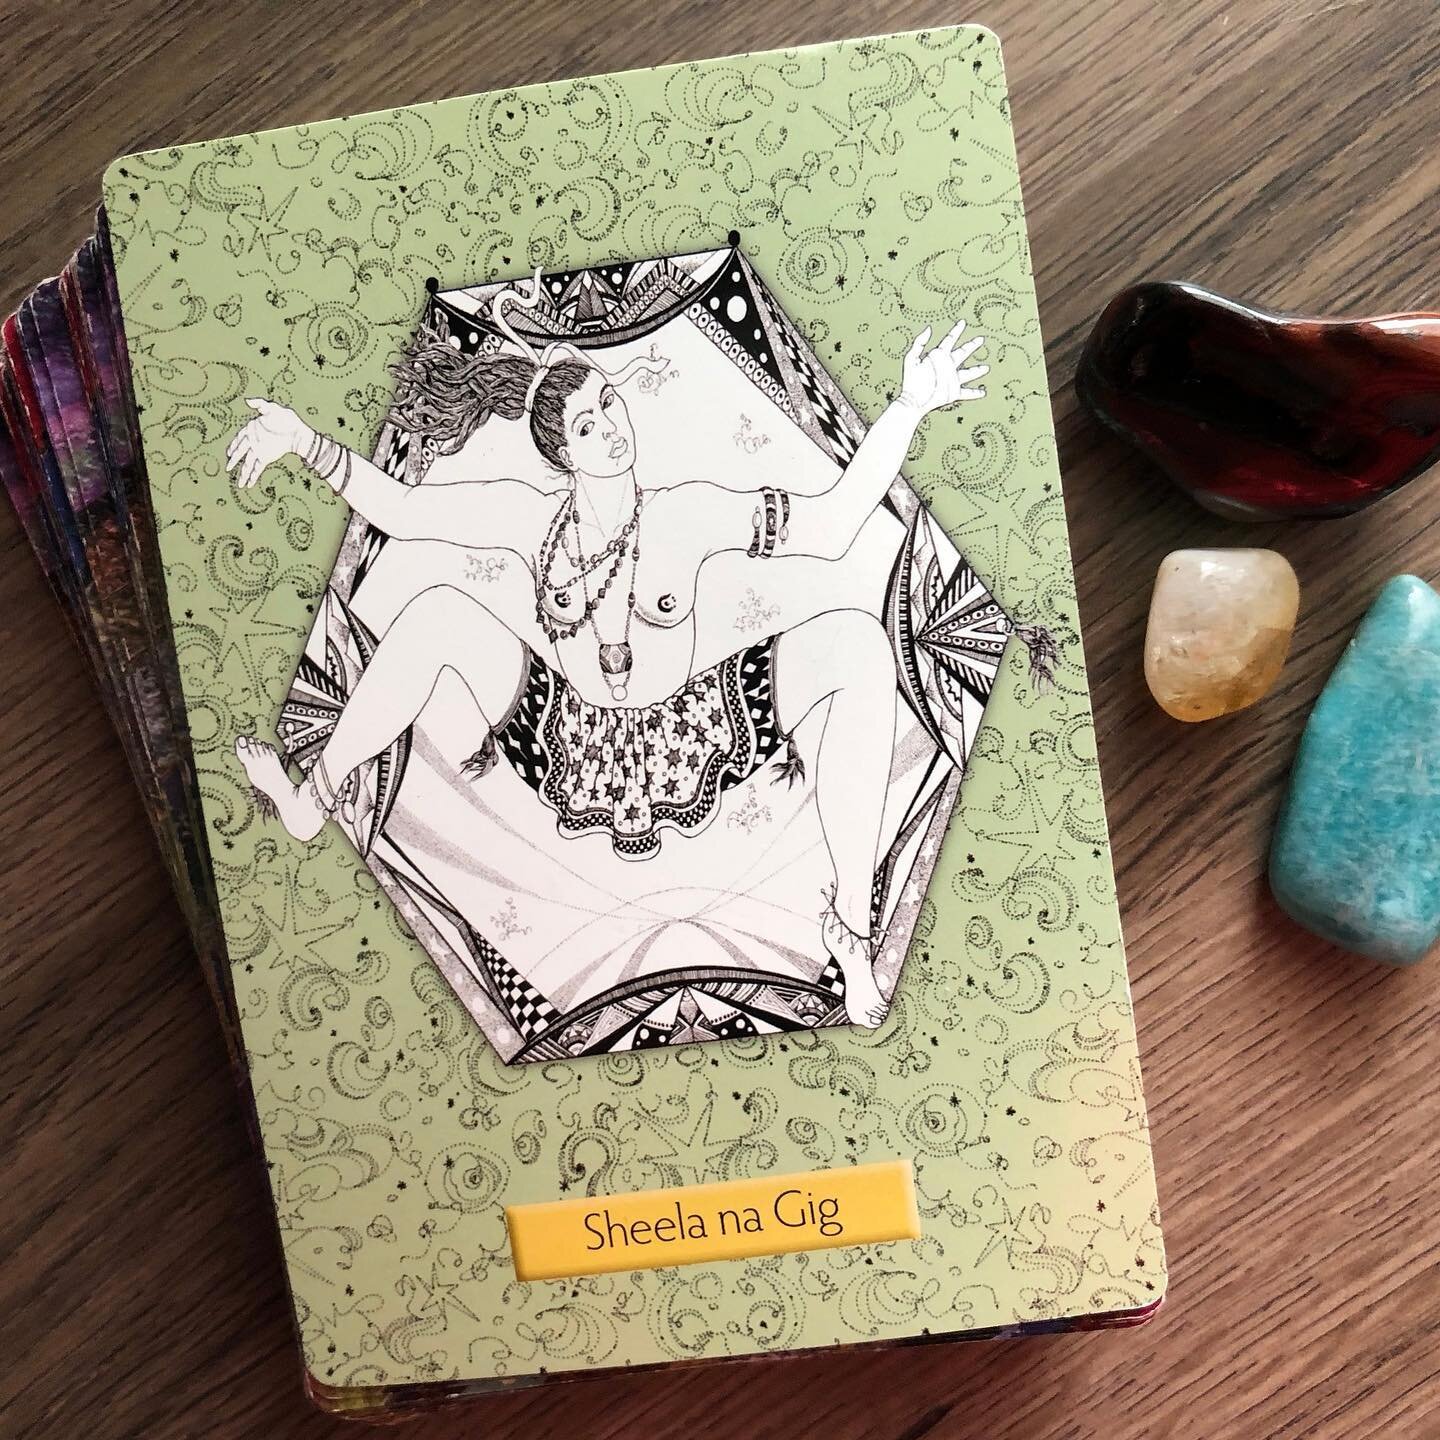 Journey Card of the Day for Inspired Guidance⁠⁠
Enjoy these weekly offerings, during this time of uncertainty, to cultivate calm and inspire reflection.⁠⁠
⁠⁠
Sheela na Gig &ndash; Joy &amp; Enchantment⁠⁠
Inspires us to continually awaken to the ecsta